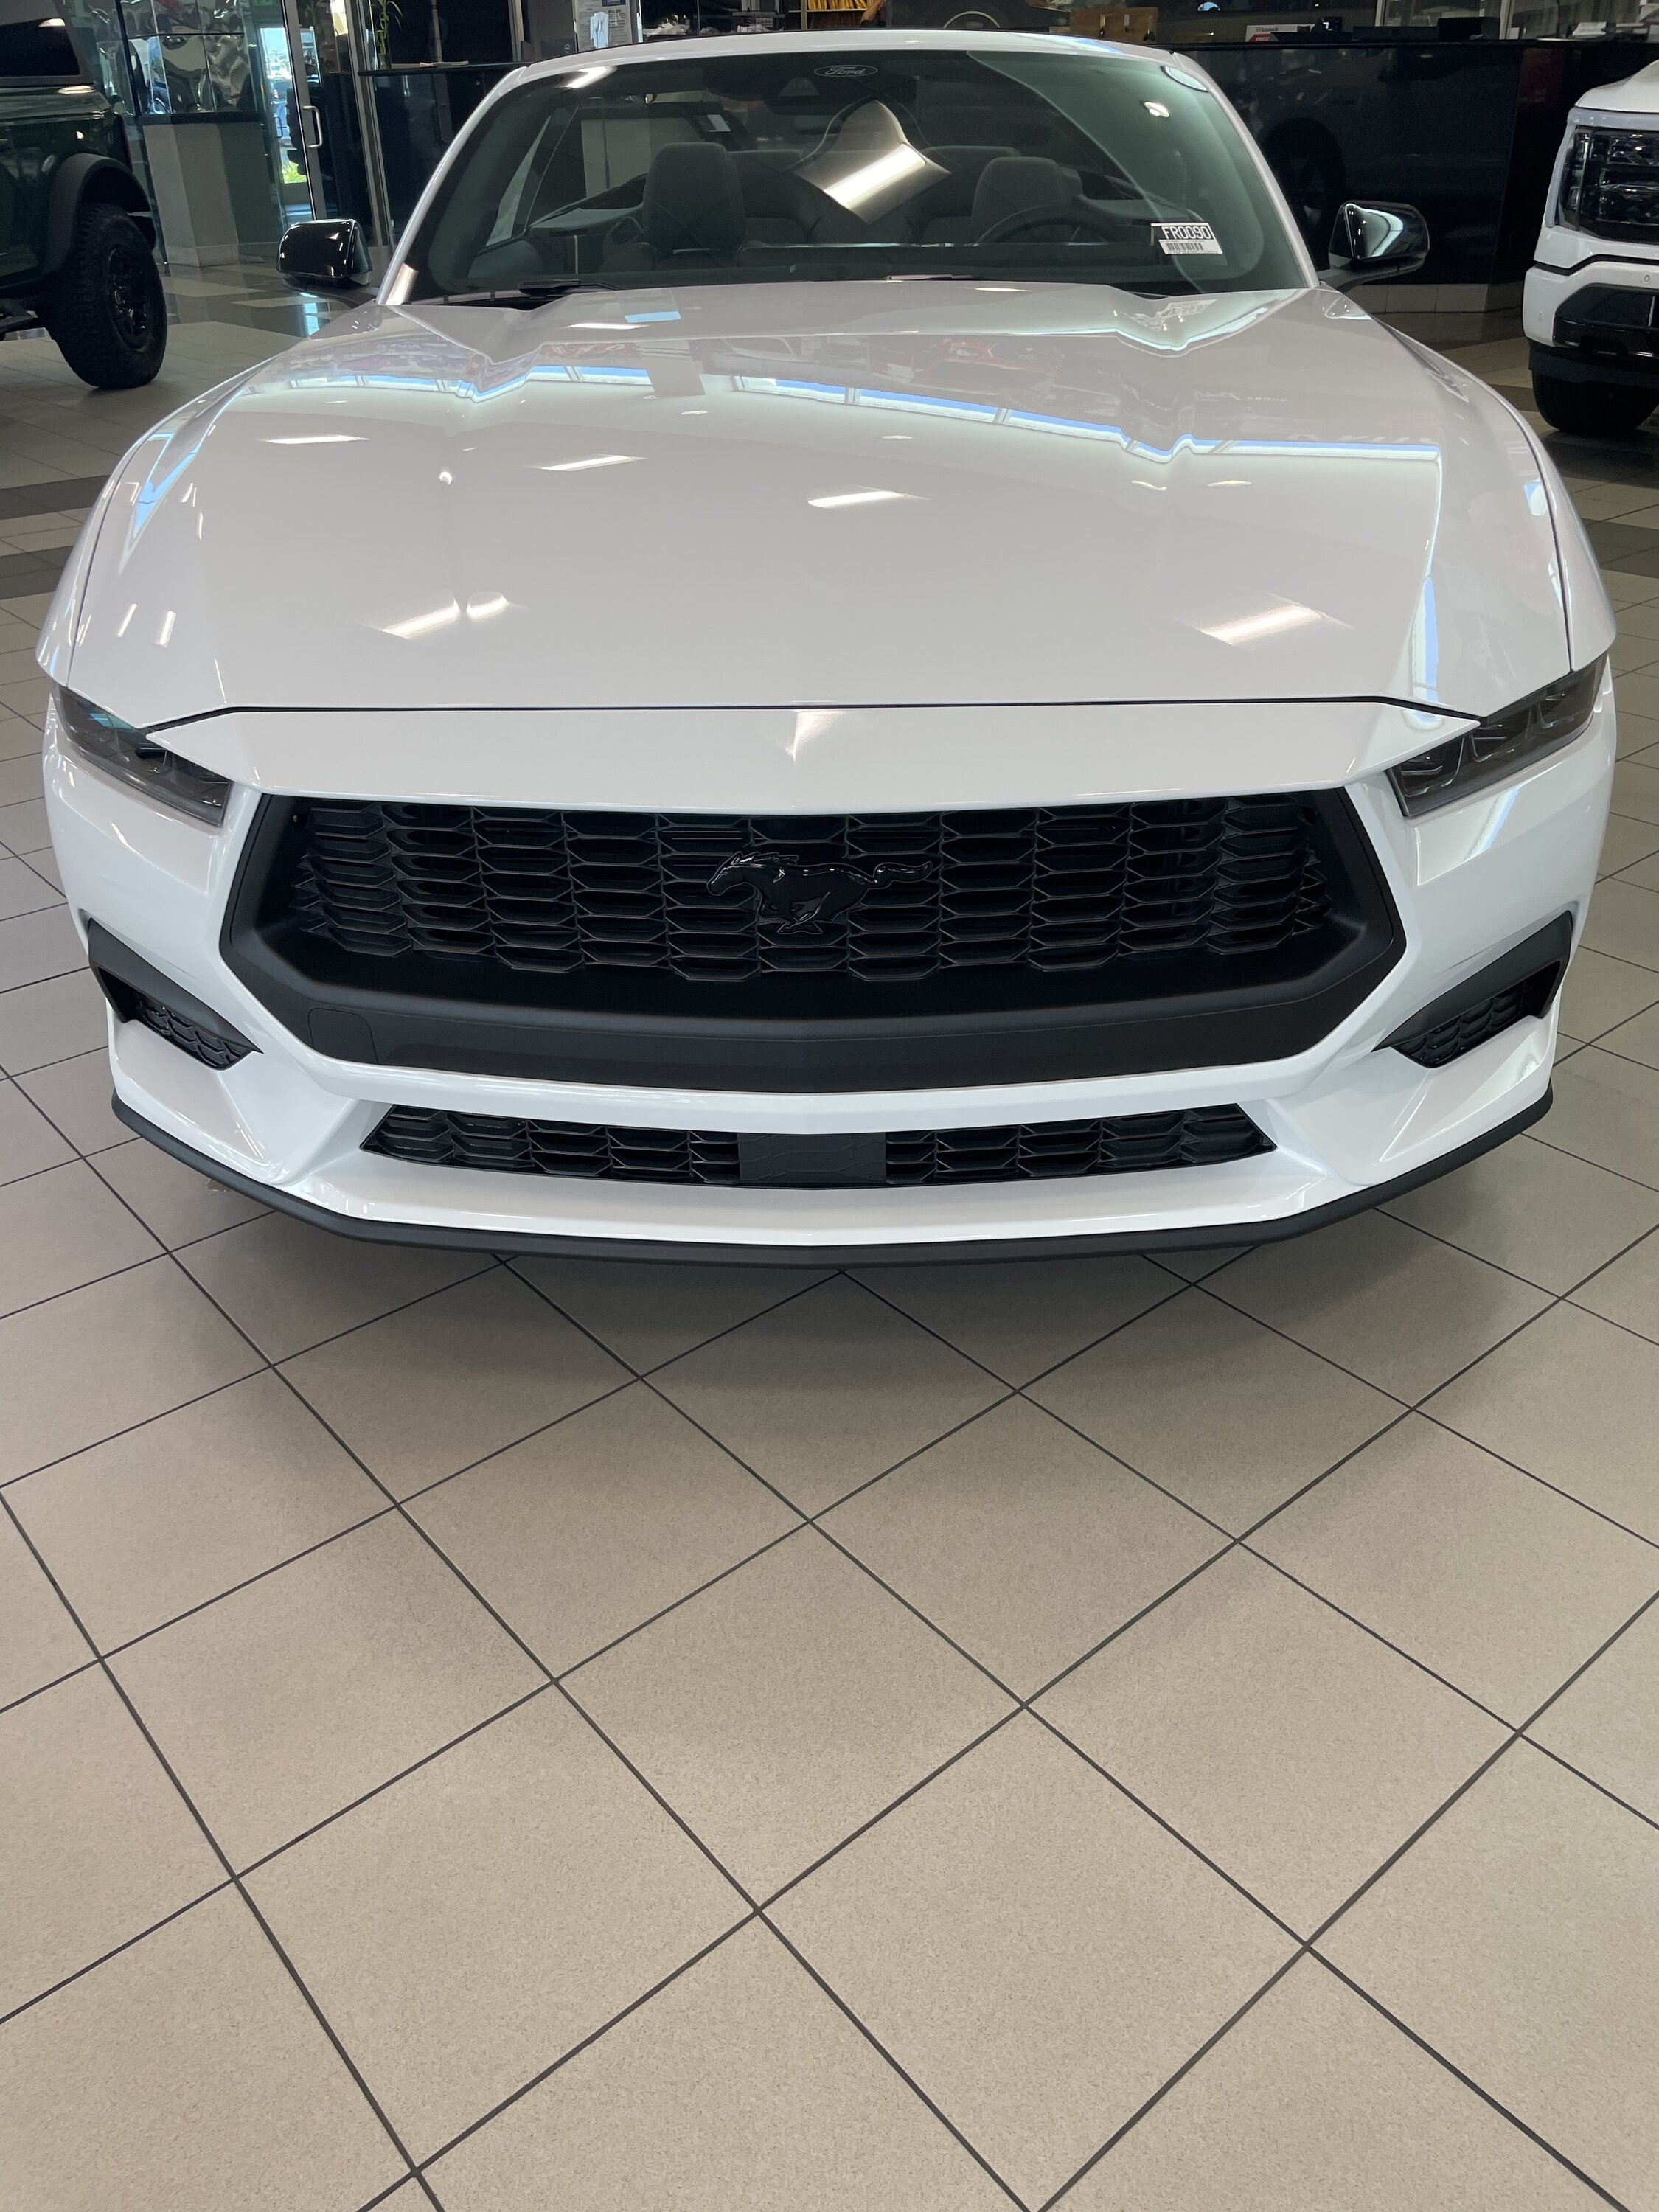 S650 Mustang Official OXFORD WHITE Mustang S650 Thread 4B104AA0-AEC9-42D9-89B1-557E942FAE7B